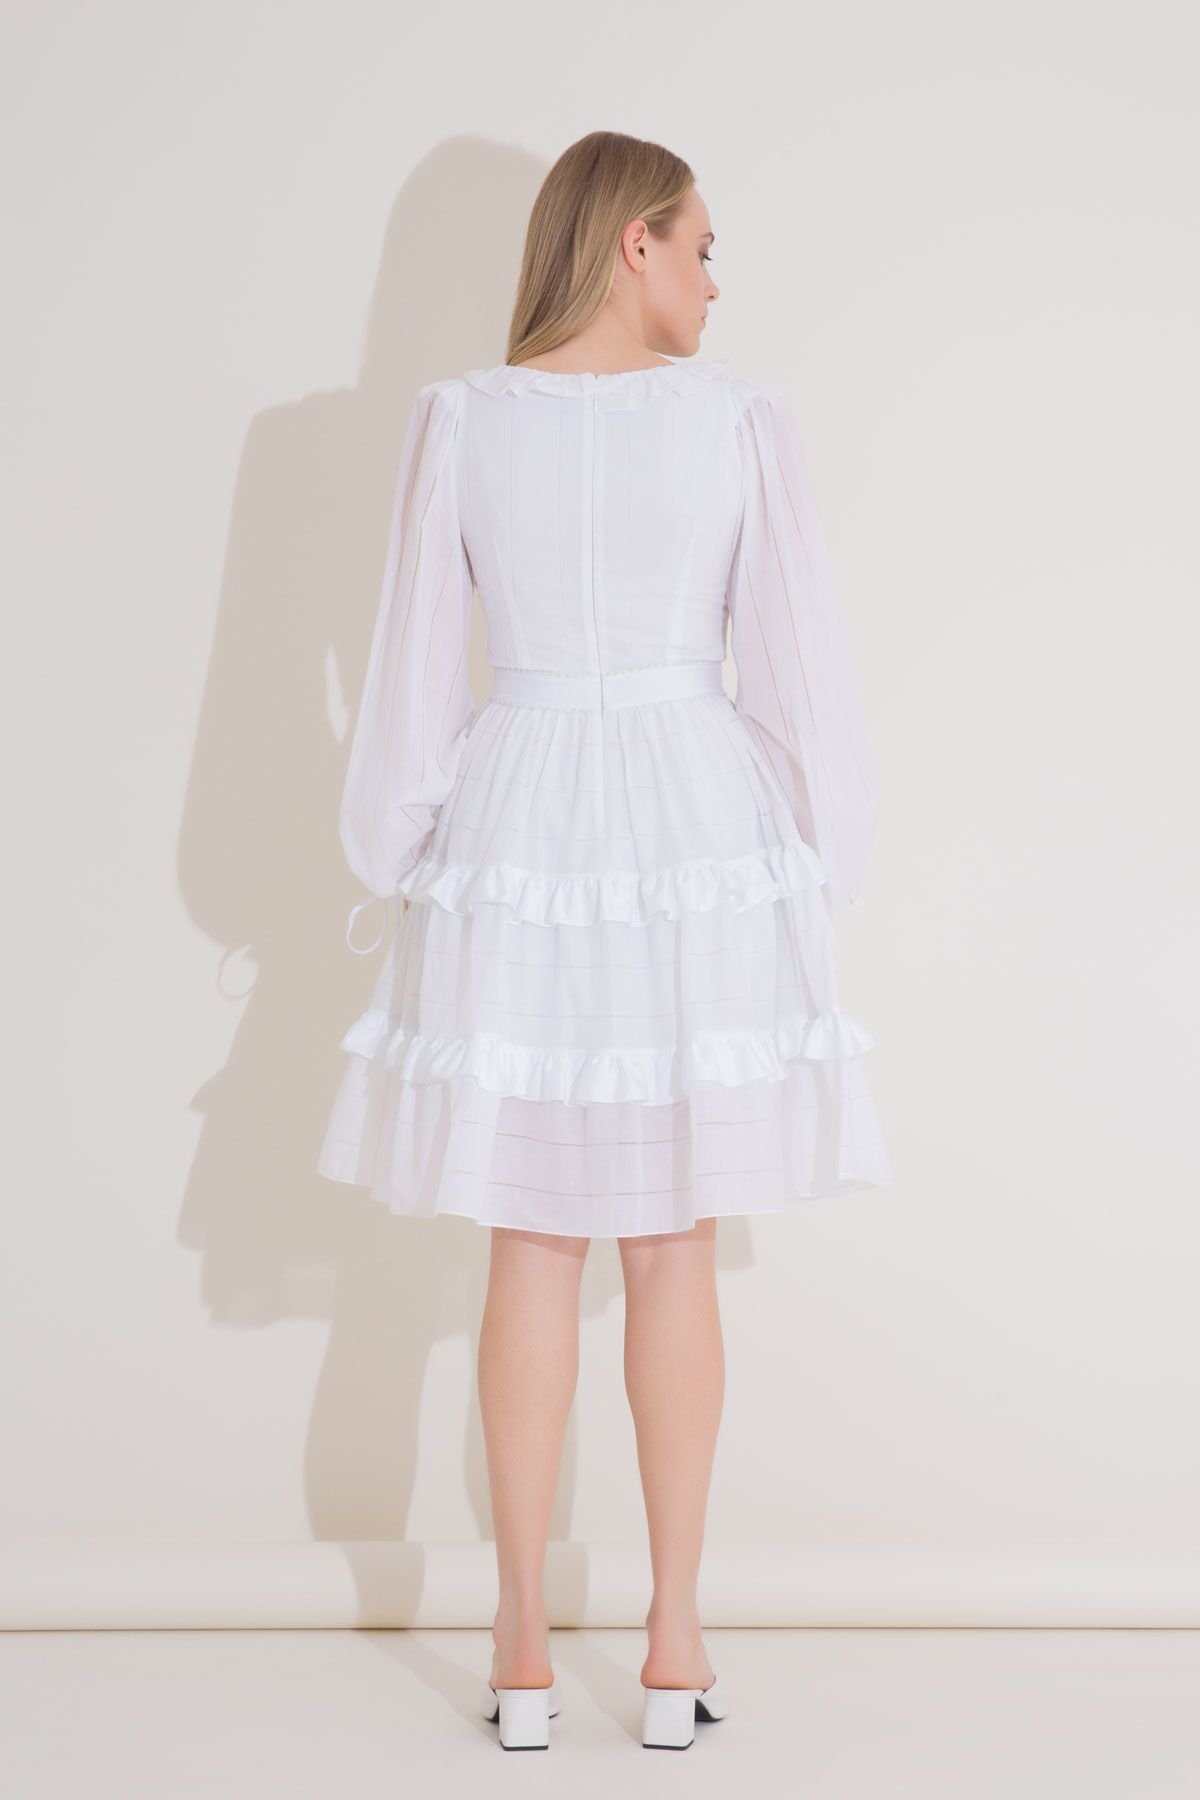 Ruffle Neck Detailed Embroidered, Pleated Mini Length Voile White Dress